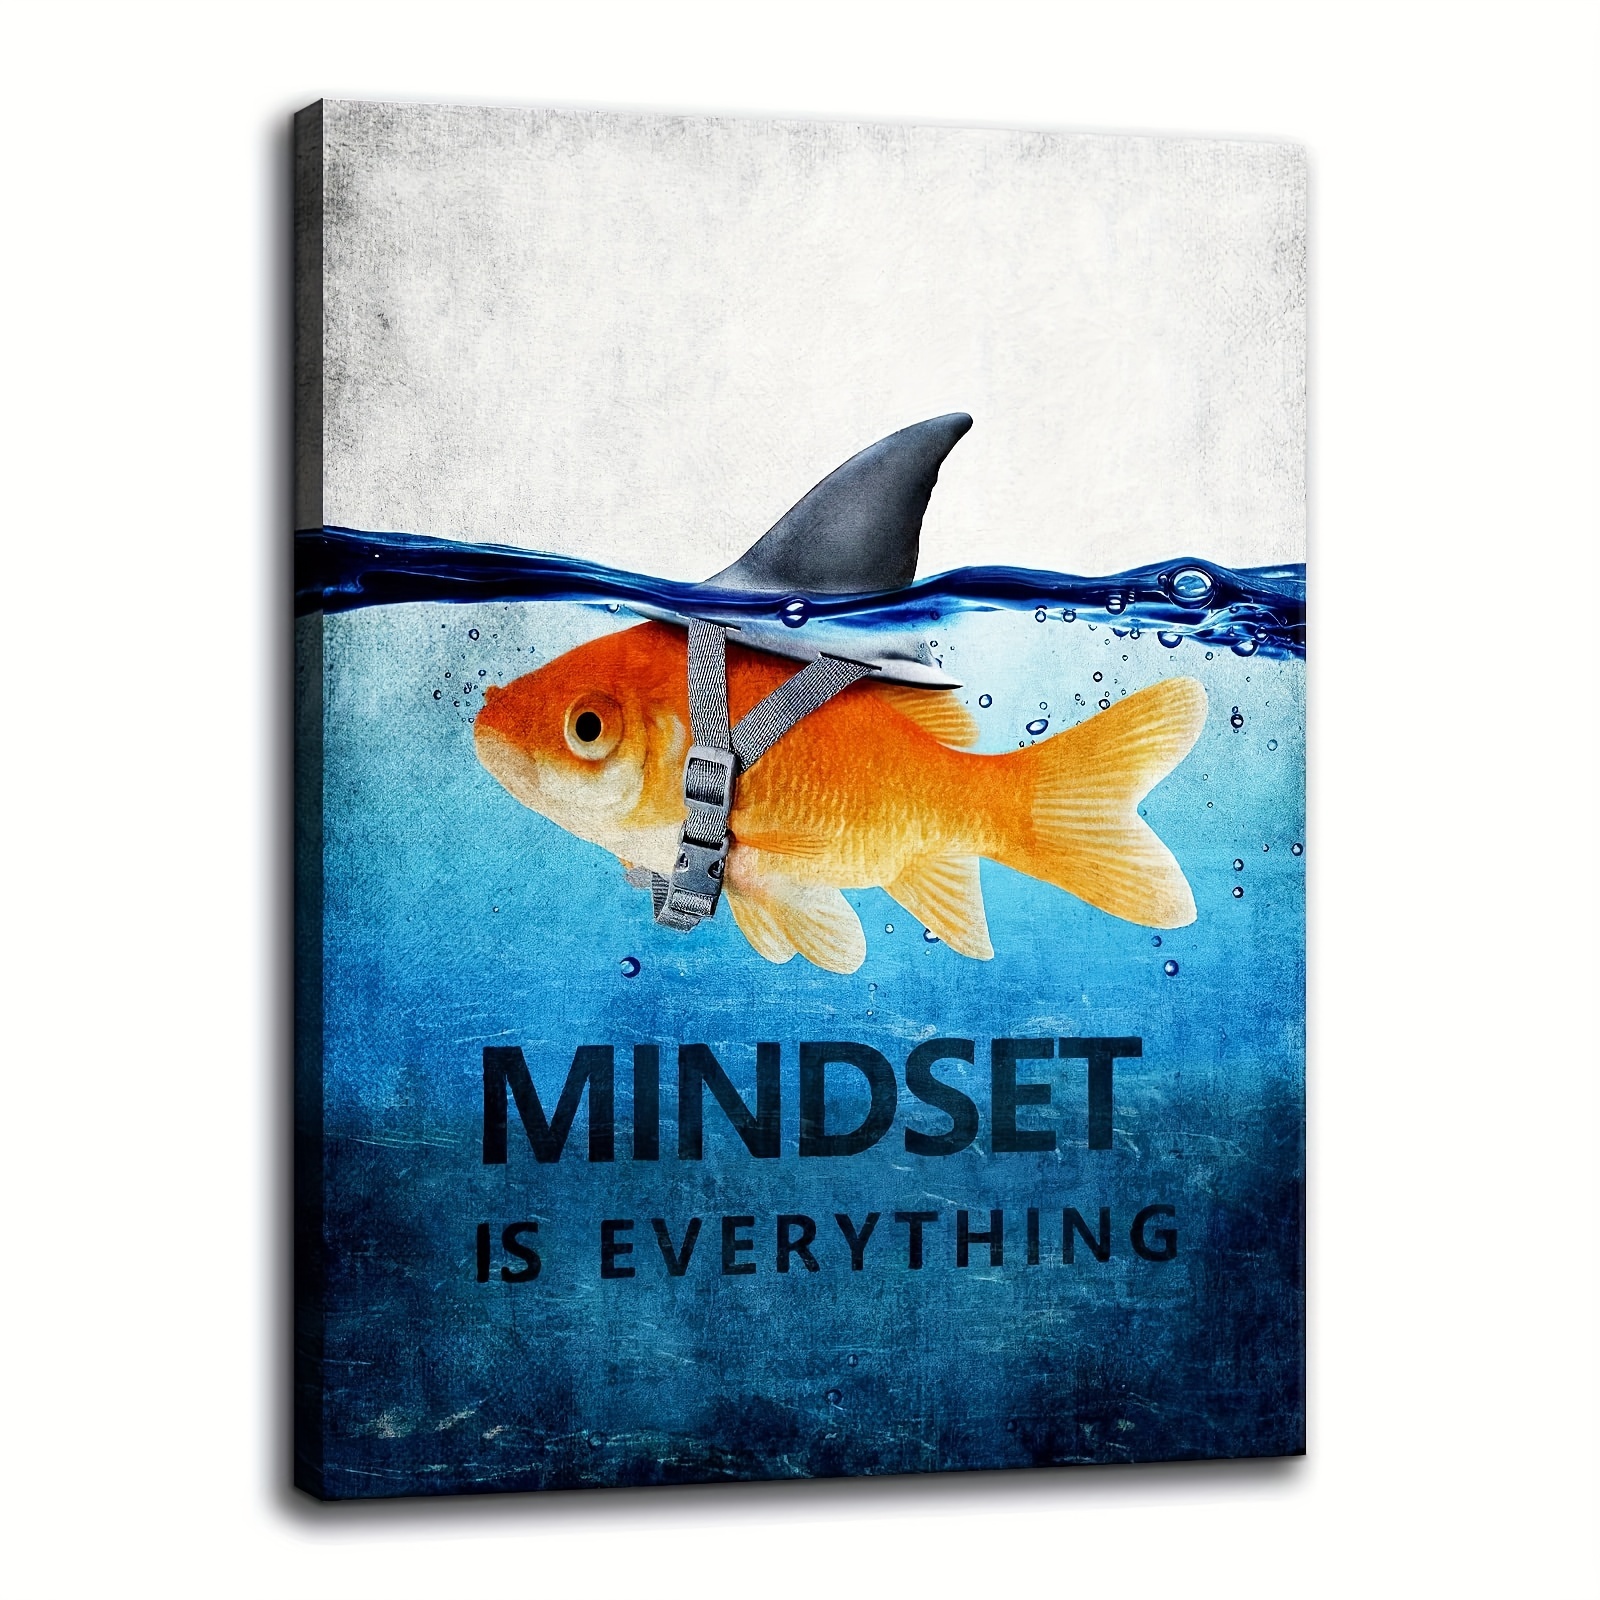 1pc inspiration wall art posters goldfish pictures mindset is everything print poster big shark canvas painting artwork home decor for living room bedroom office unframed